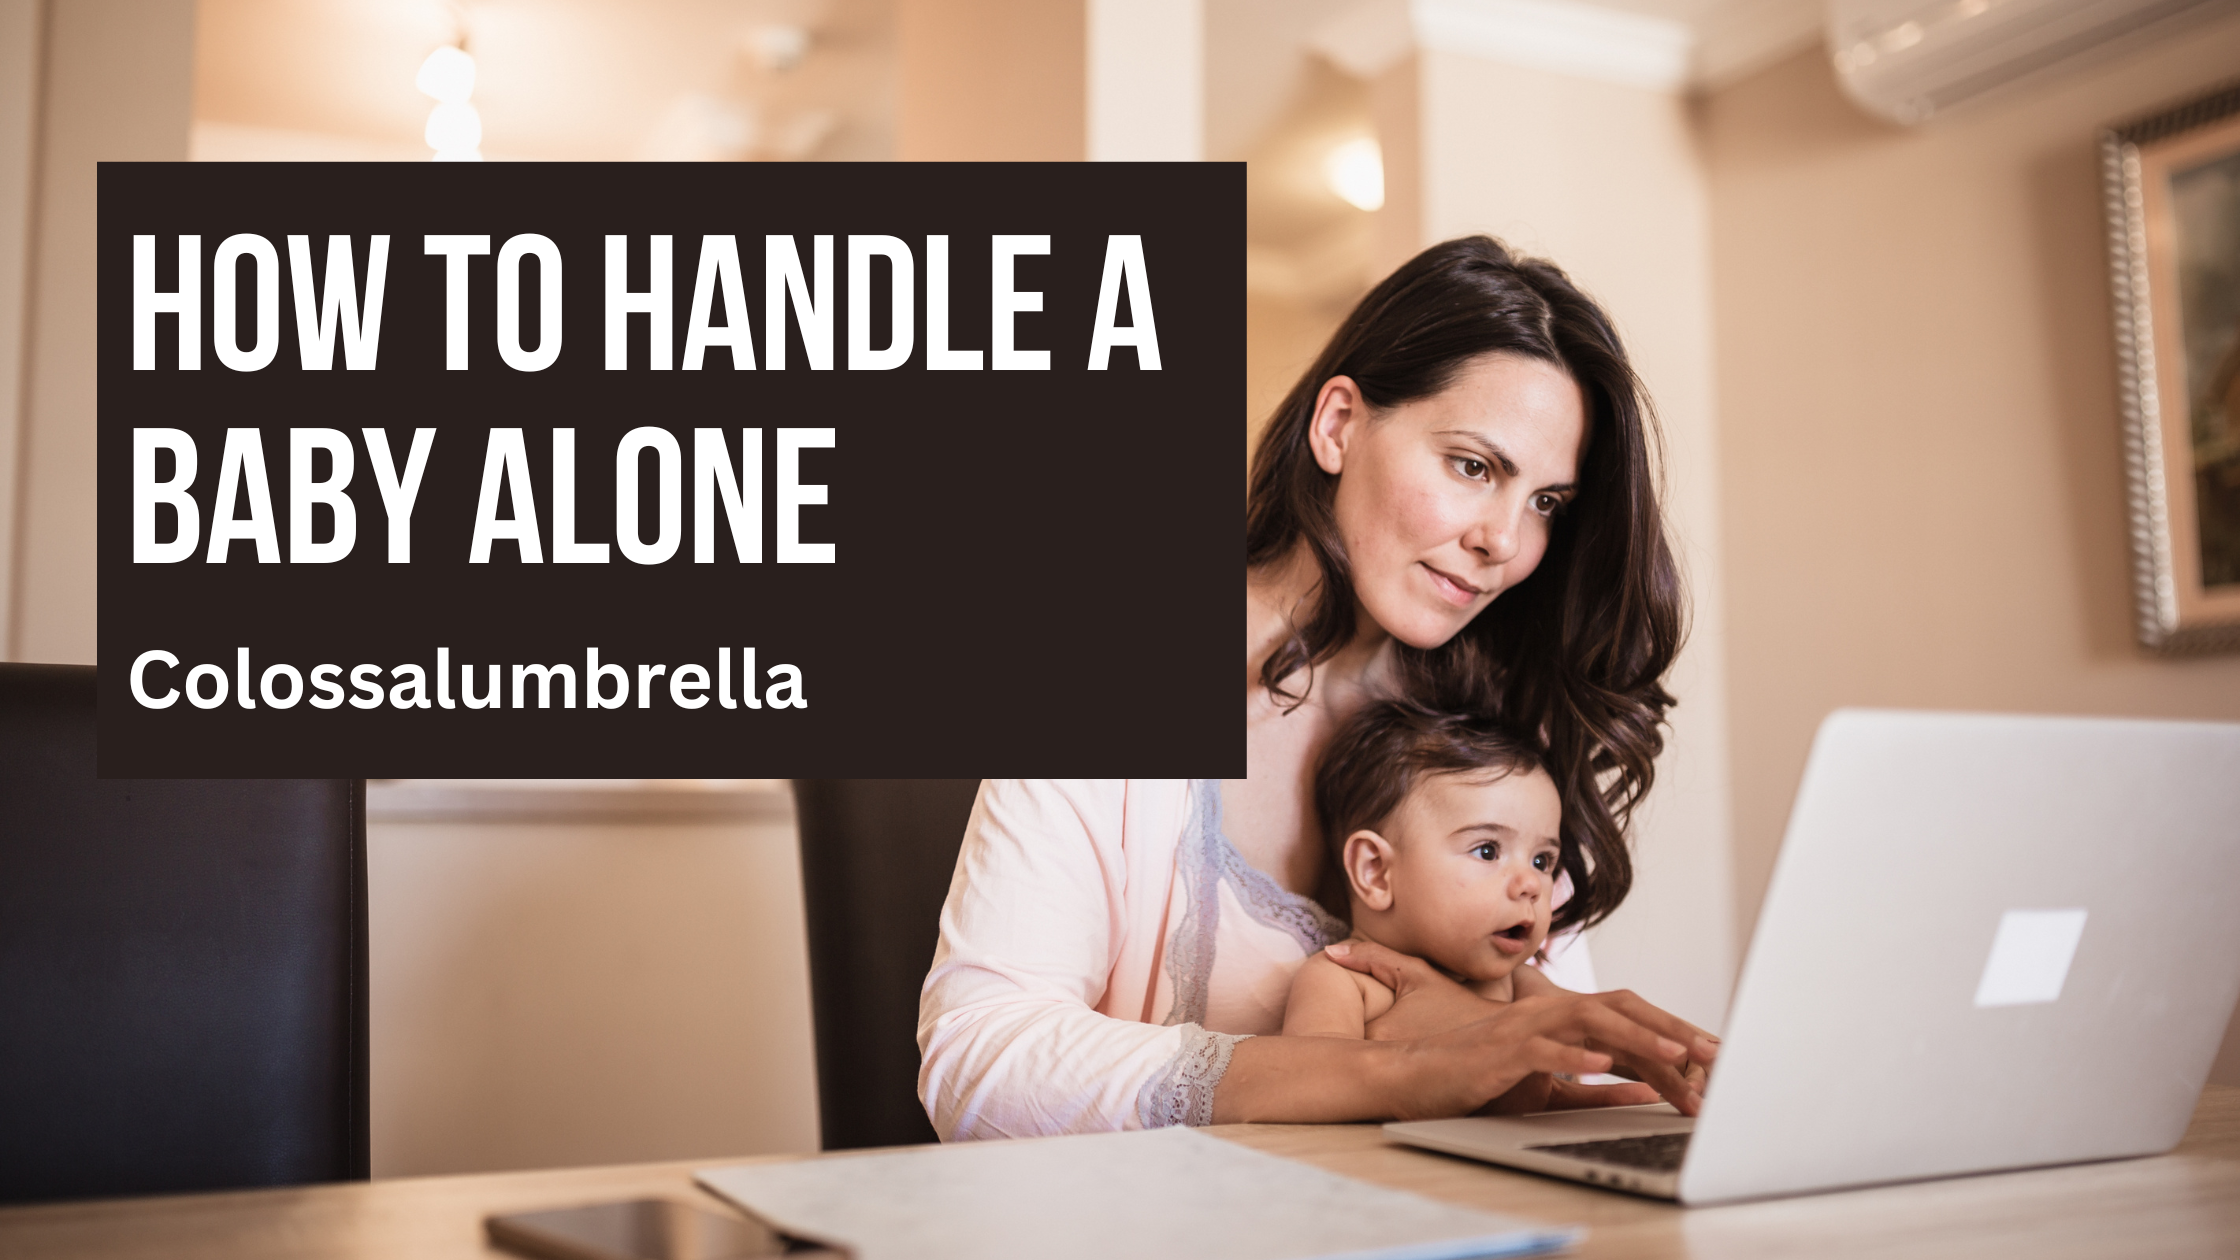 How to handle newborn baby alone by Colossalumbrella